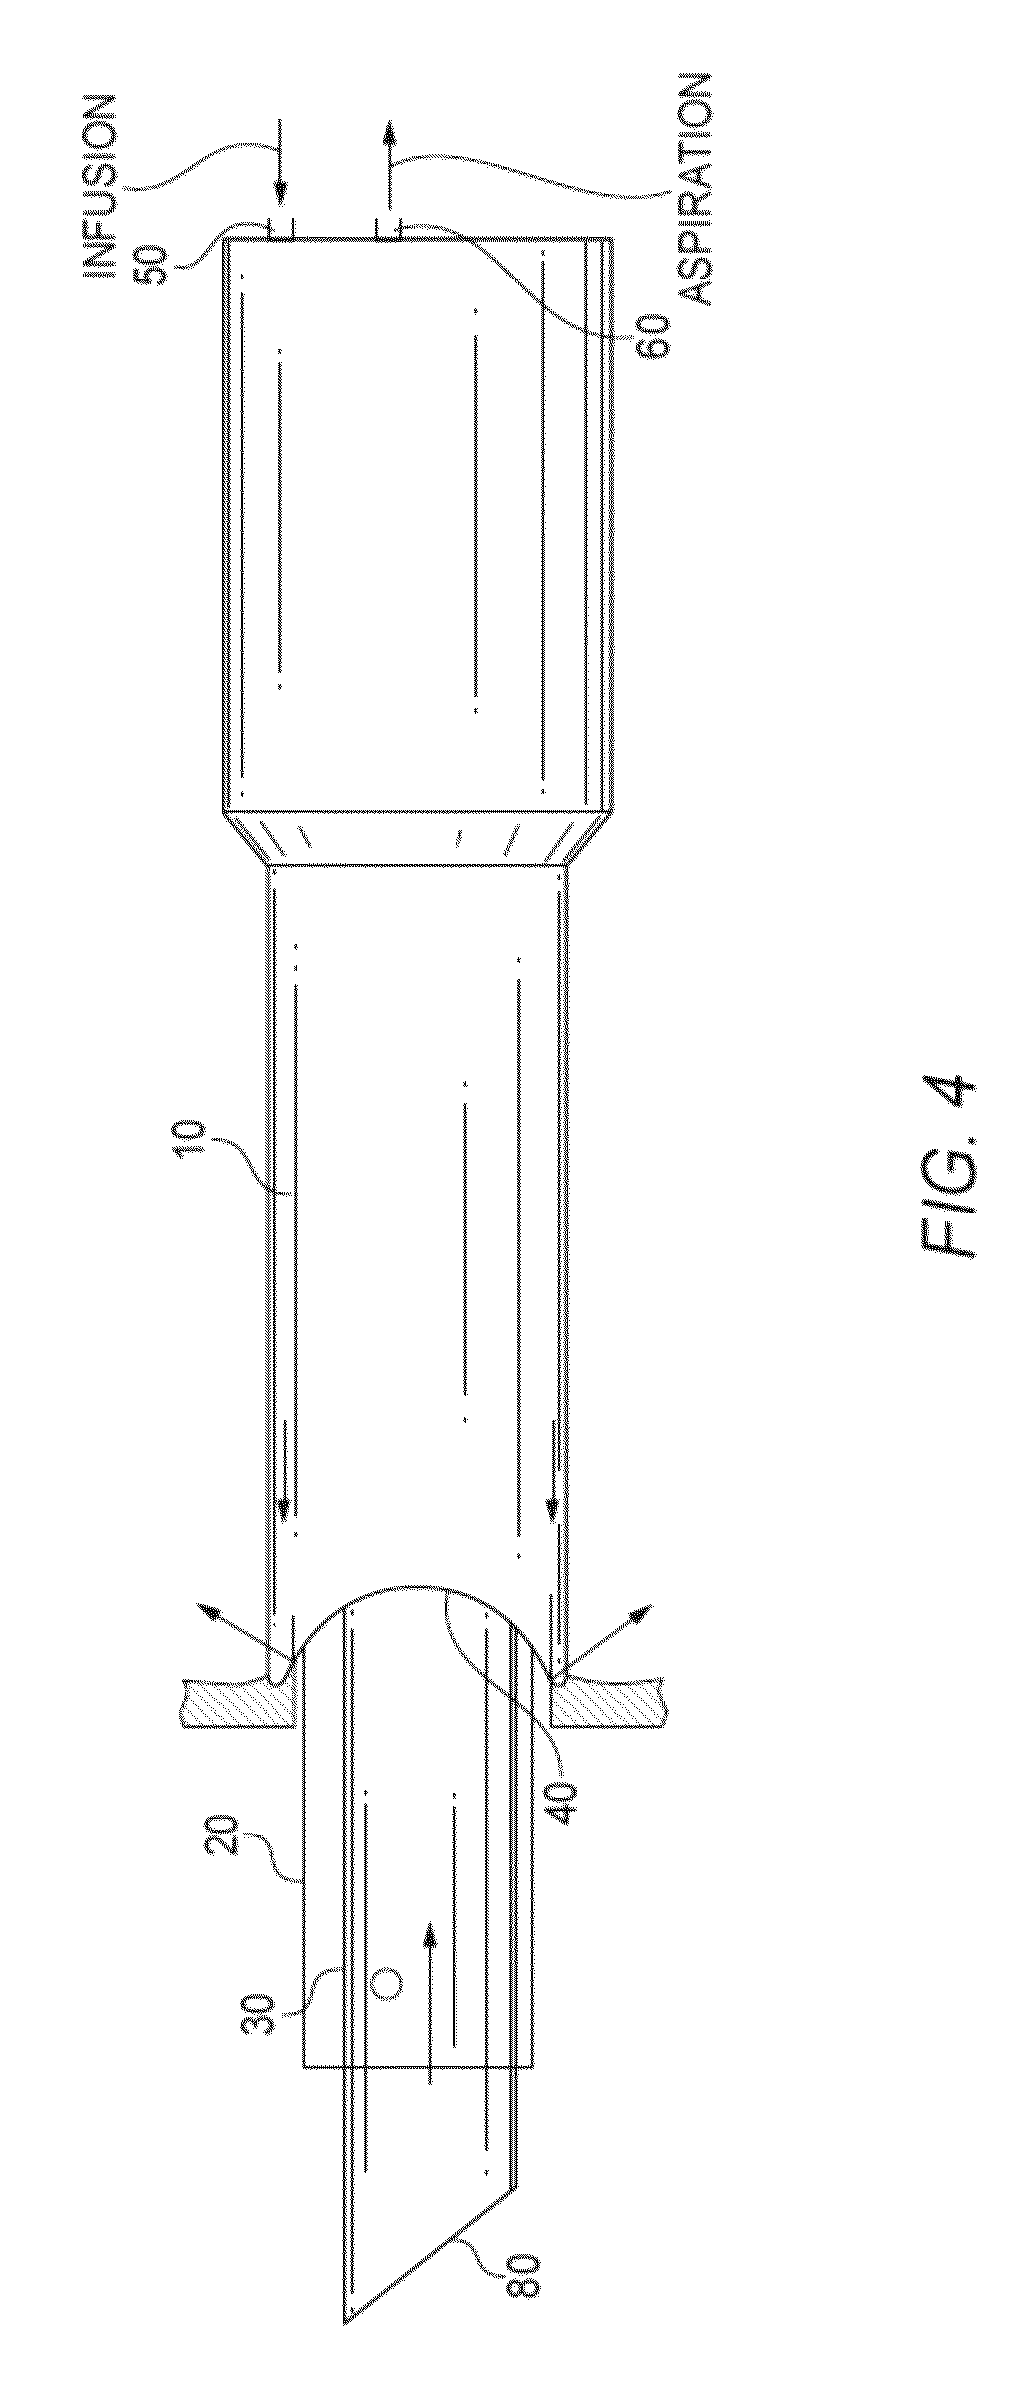 Multi-sleeved surgical ultrasonic vibrating tool suited for phacoemulsification in a manner that prevents thermal injury to ocular tissue